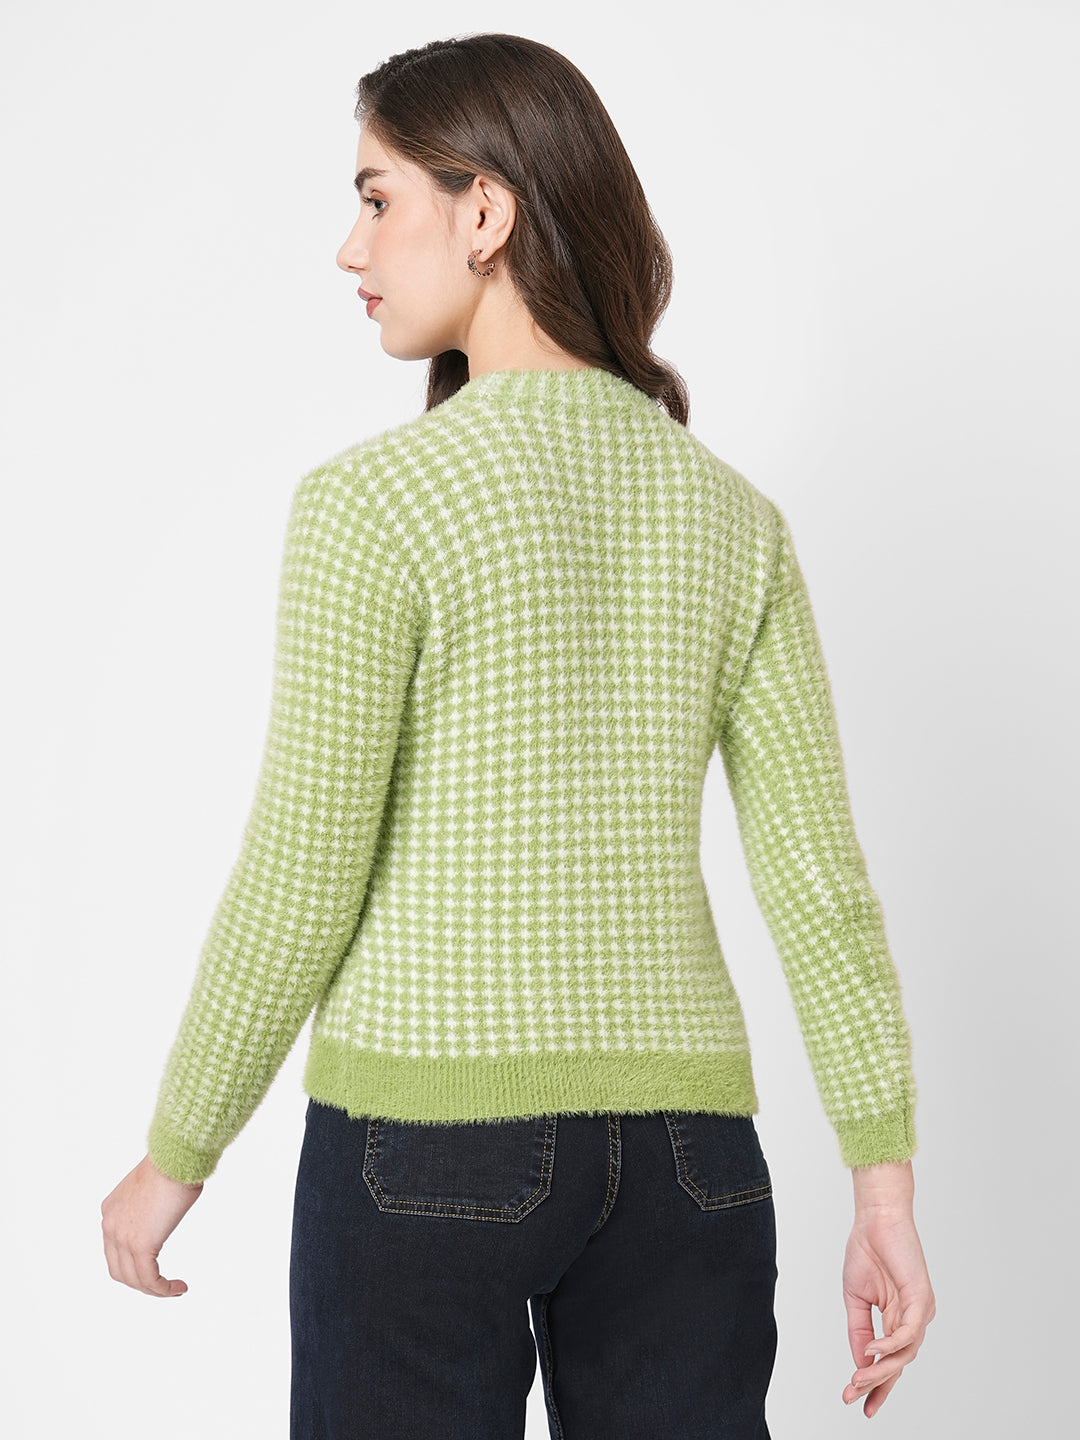 Women Woven Round Neck Long Sleeves Sweater